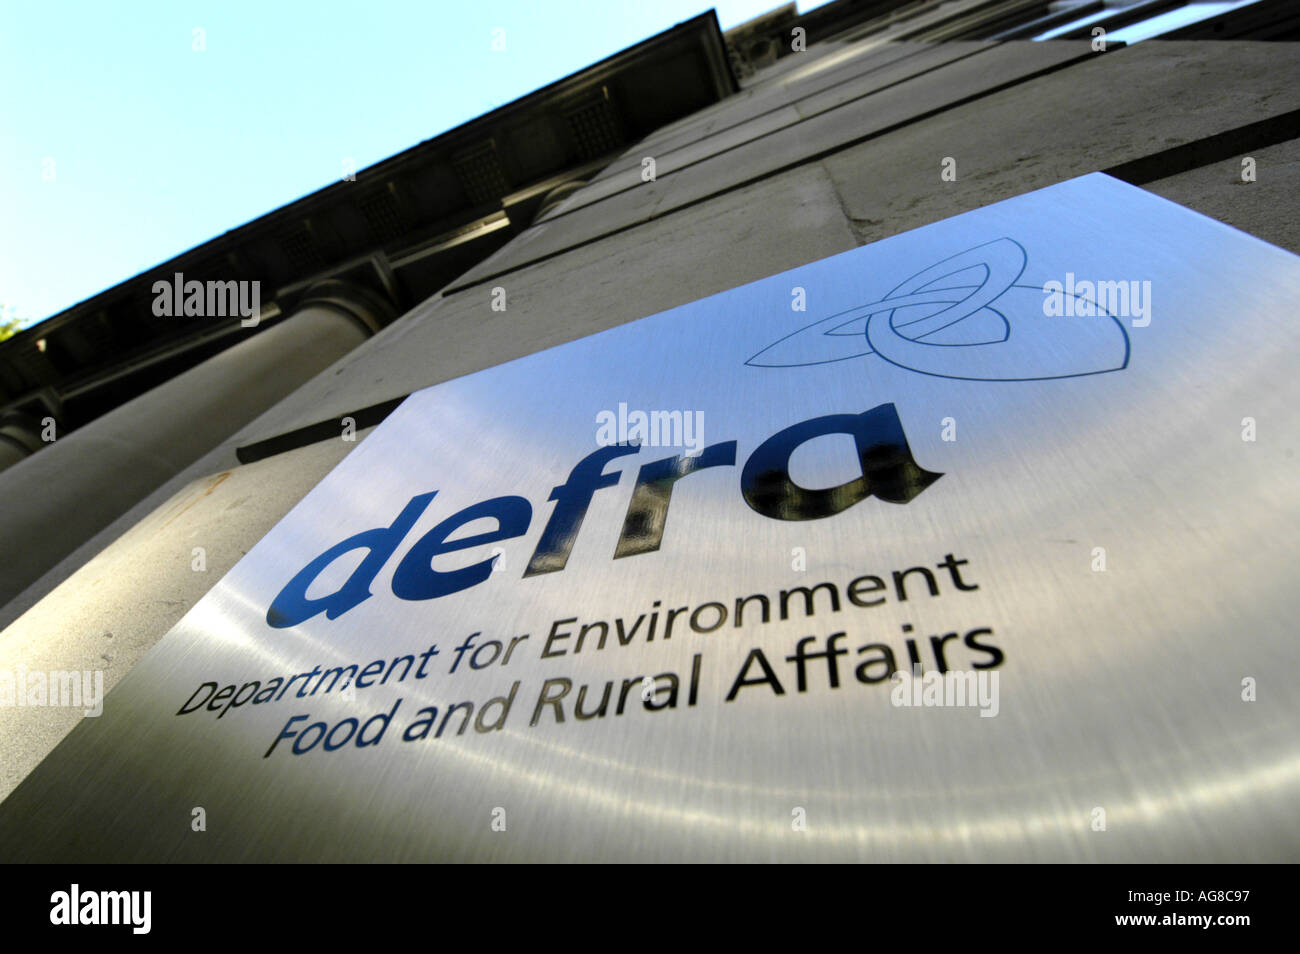 Le DEFRA Department for Environment Food and Rural Affairs, London, England, UK Banque D'Images